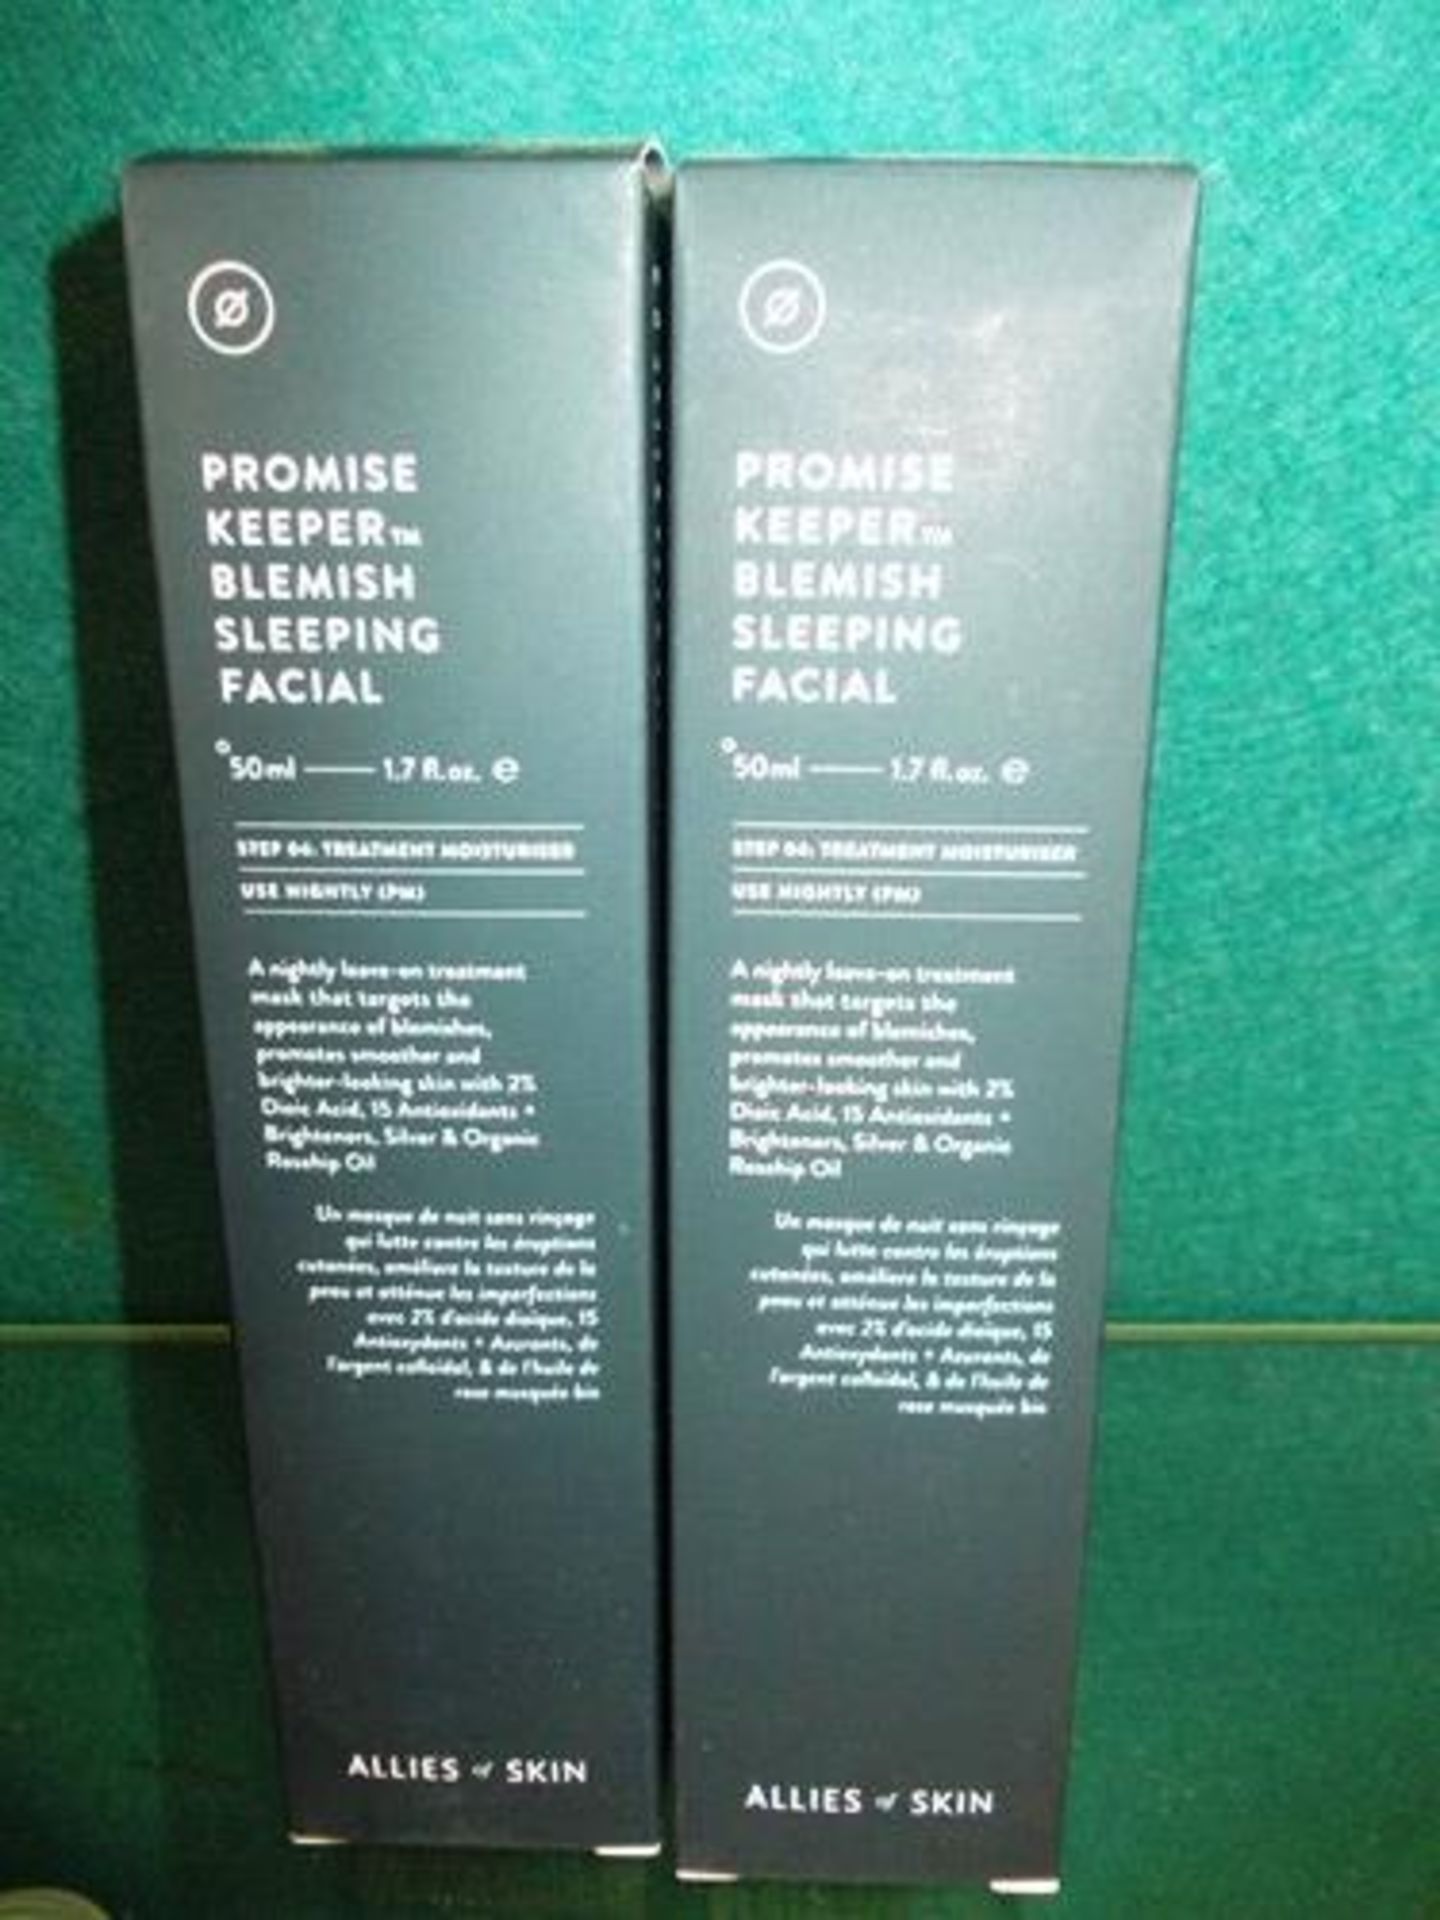 2 x 50ml tubes of Allies of Skin Promise Keeper Blemish Sleeping Facials, expiry 12/2023 - New in